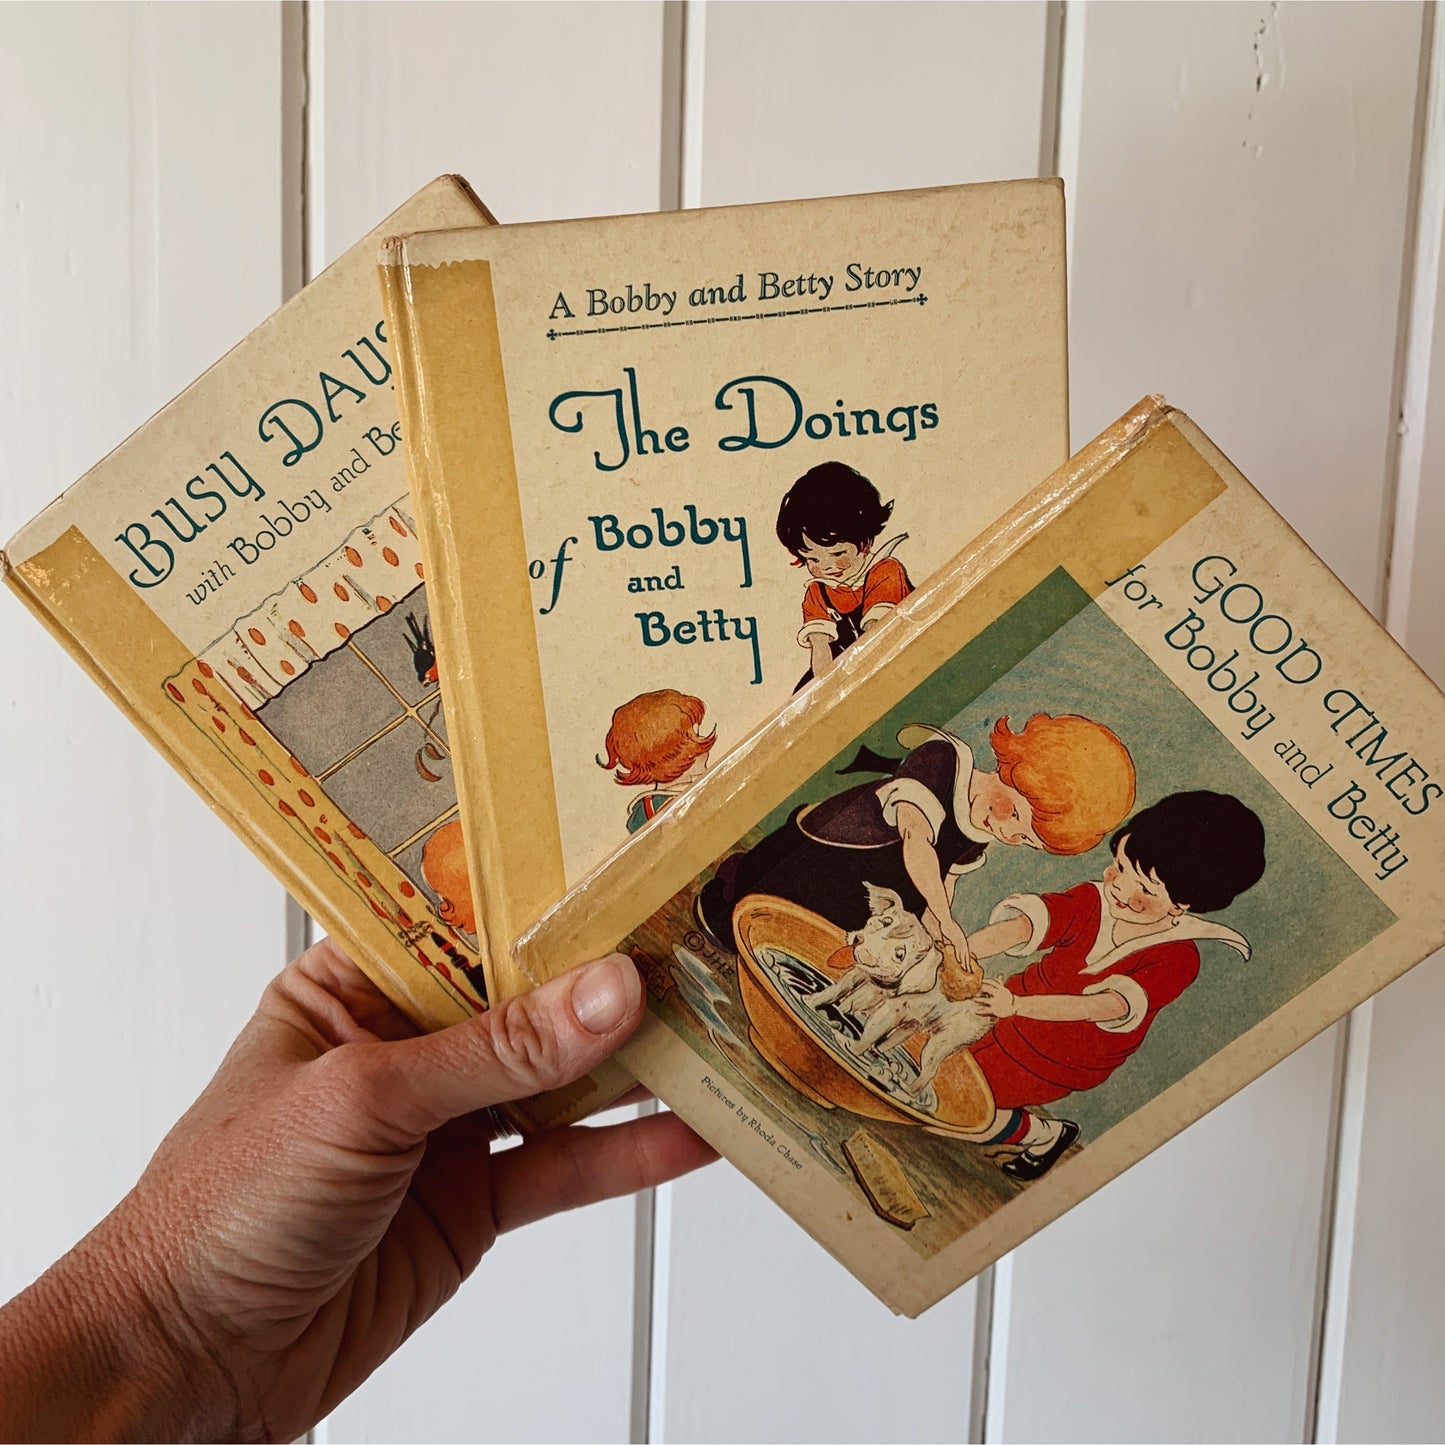 Bobby and Betty Book Bundle, 1928, Antique Picture Books